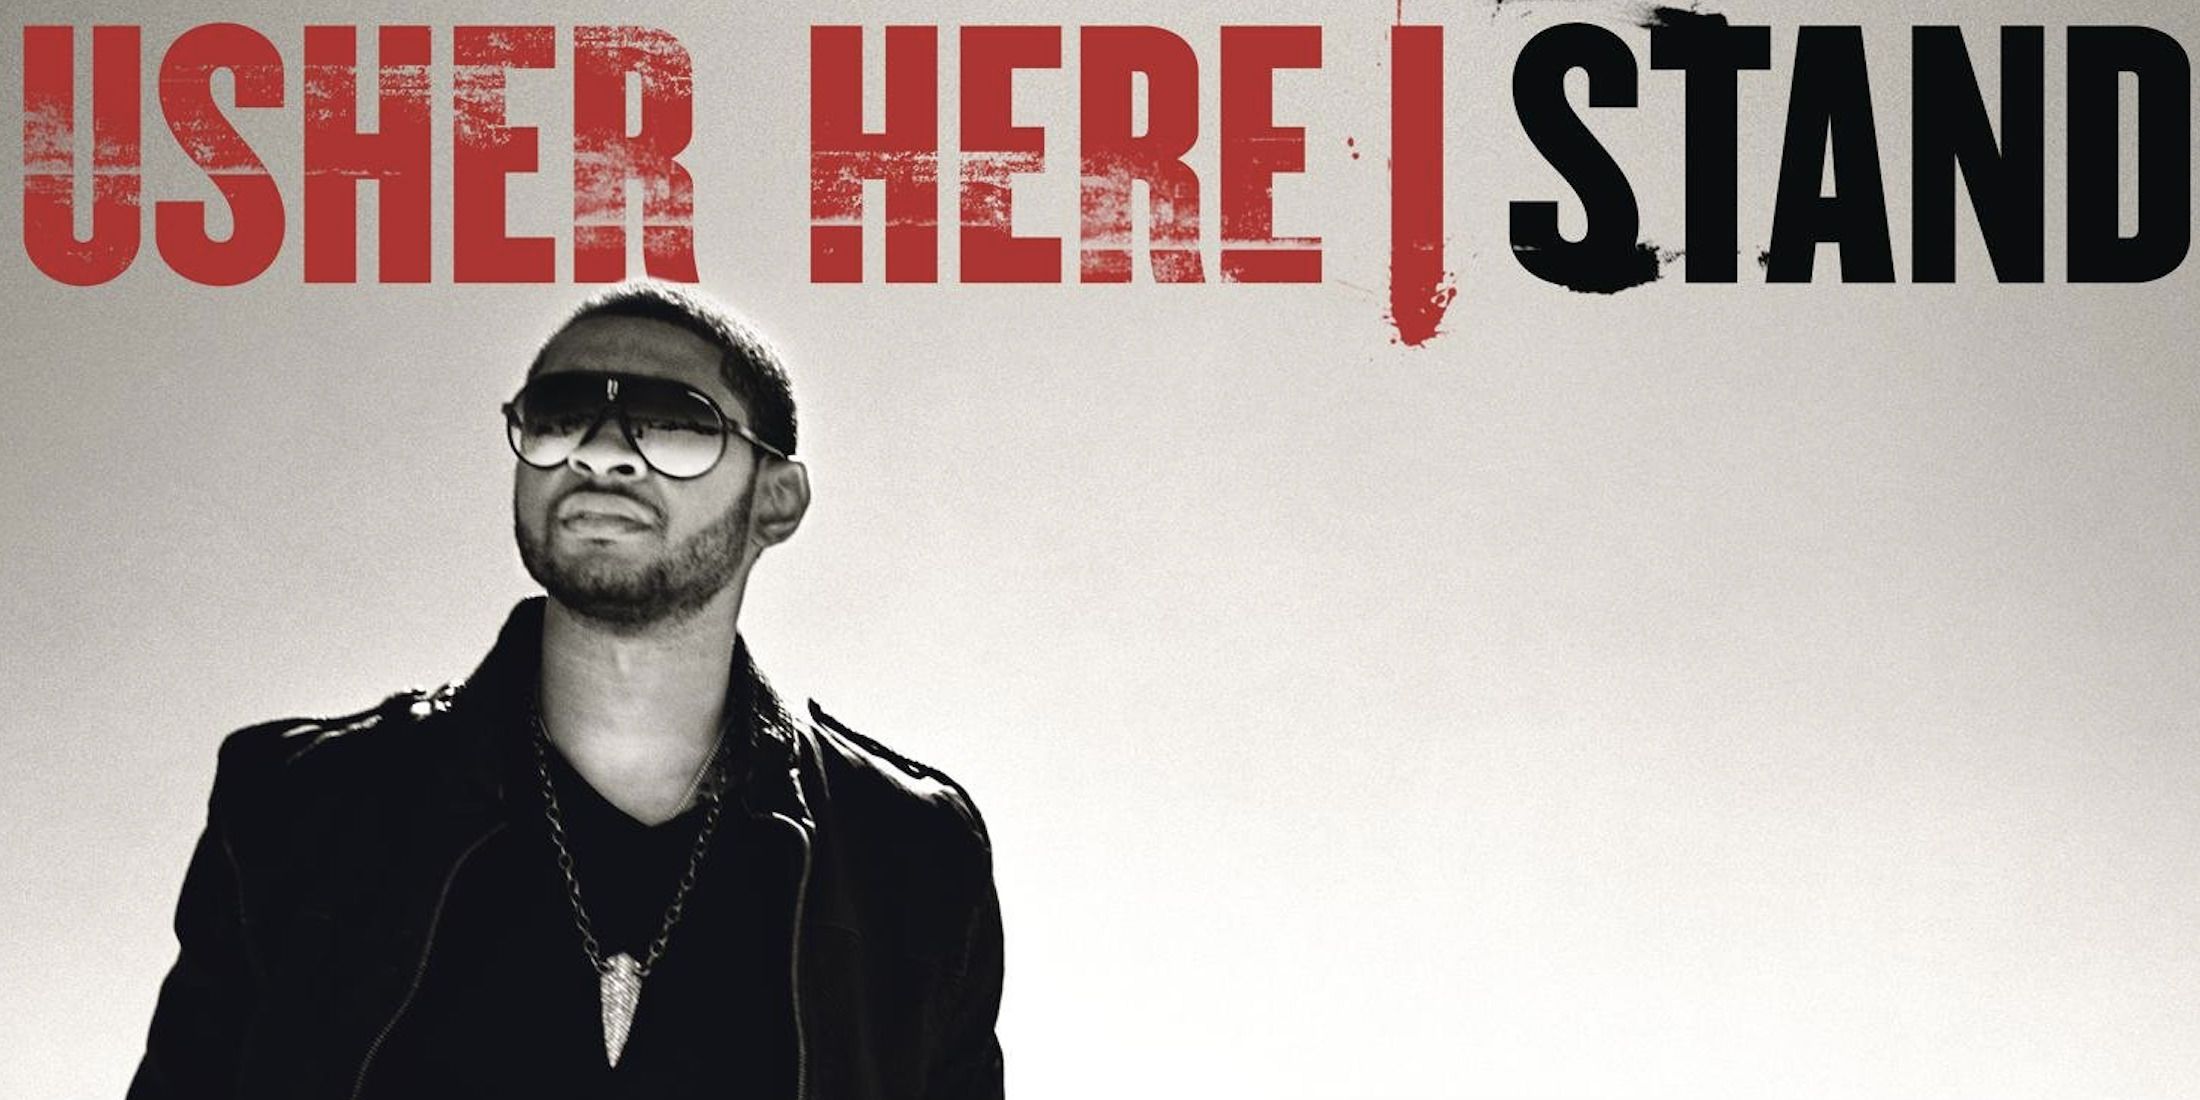 Usher Here I Stand Album Cover